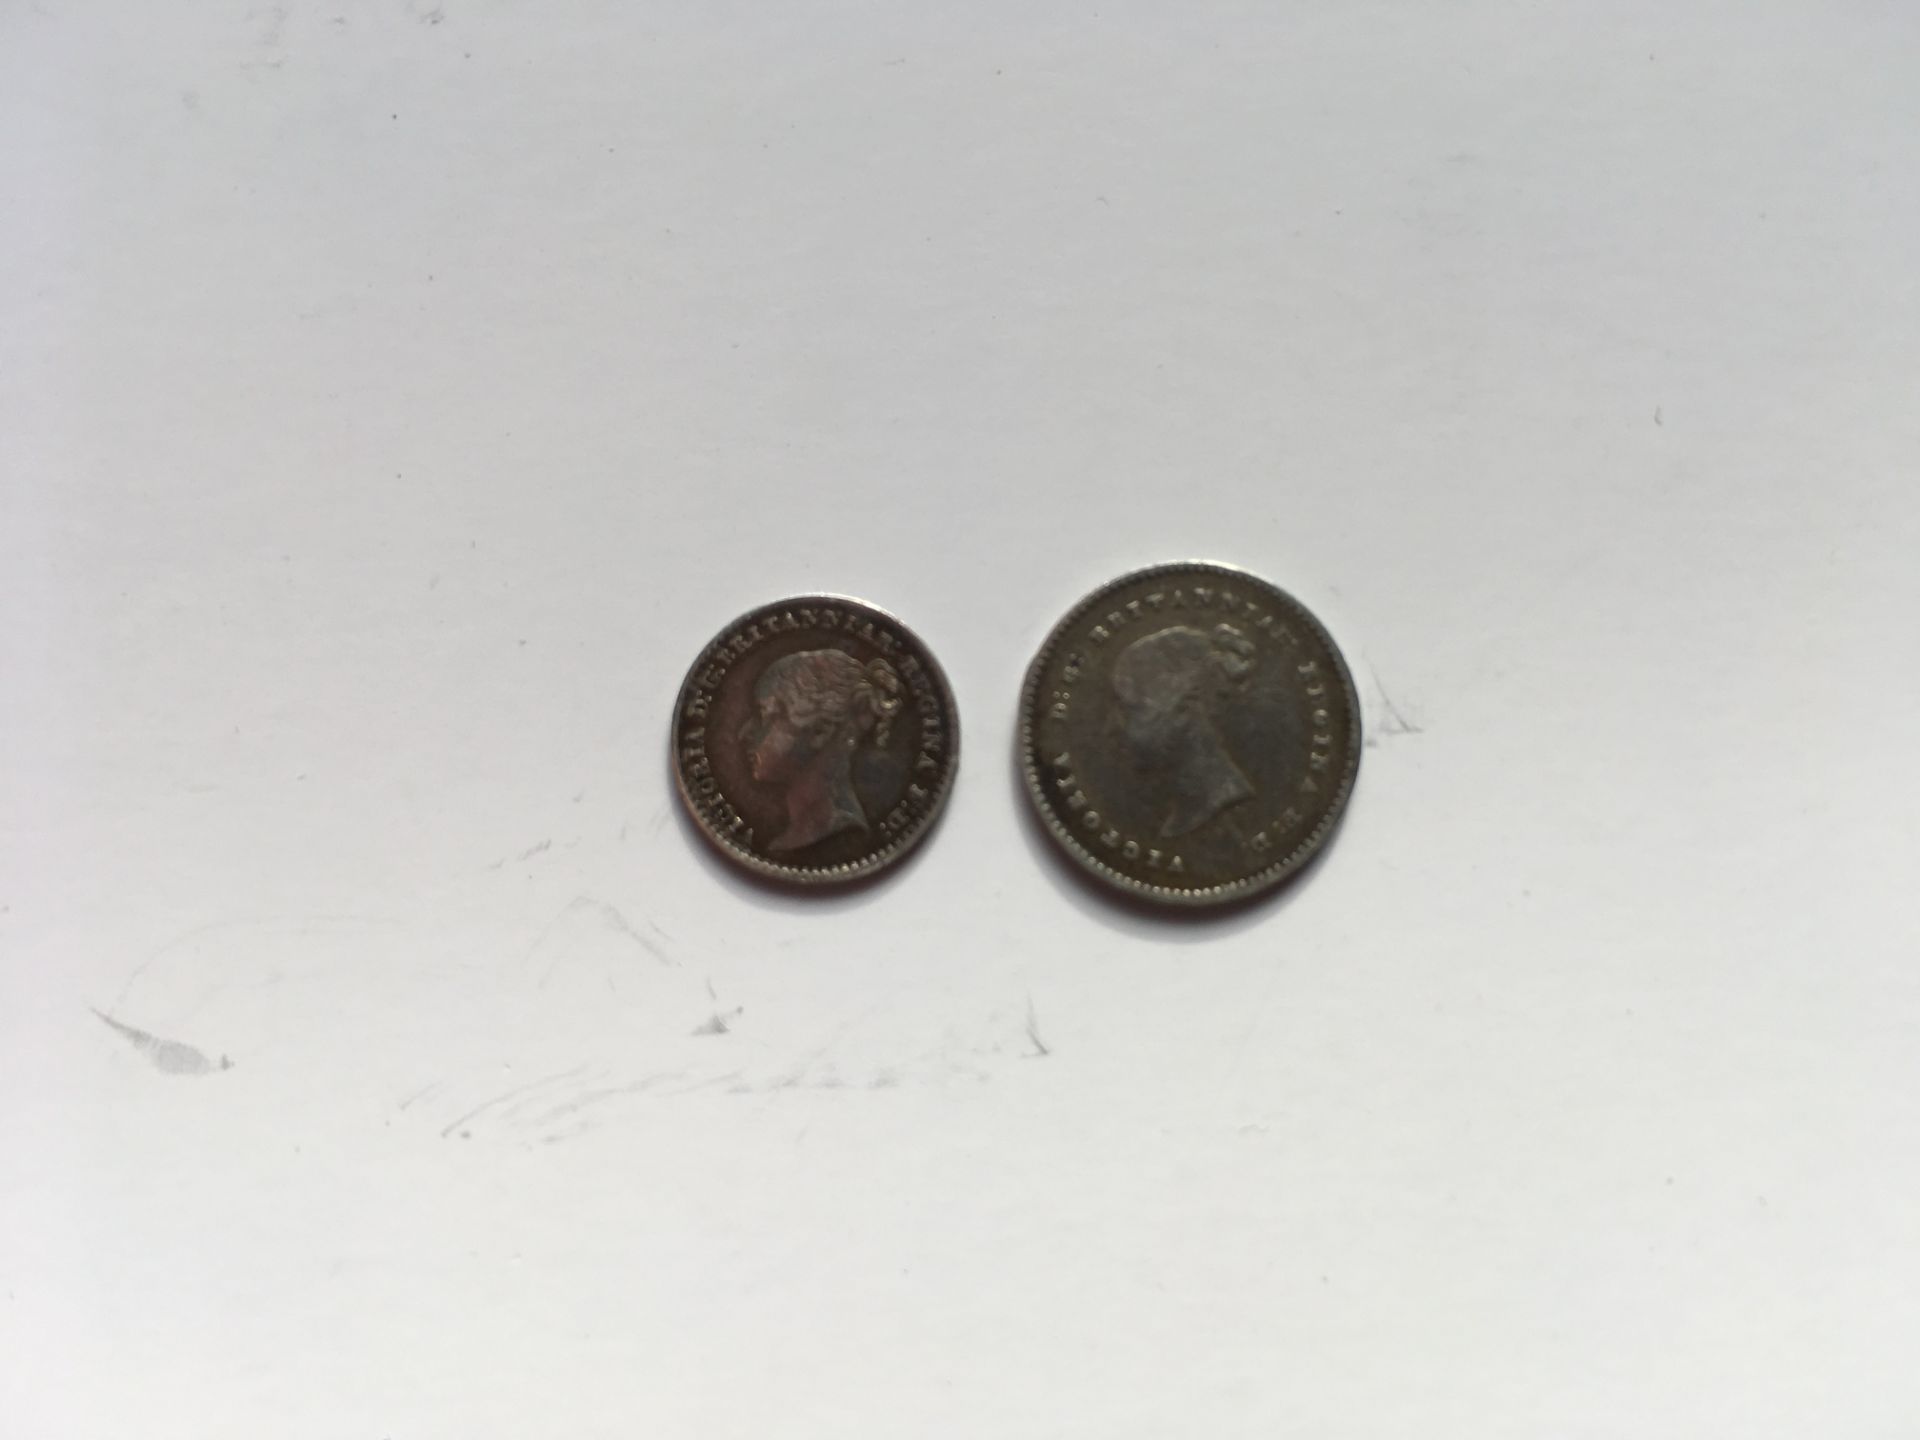 COINS: GB MAUNDY PENNY 1870 AND TWO PENCE 1838.